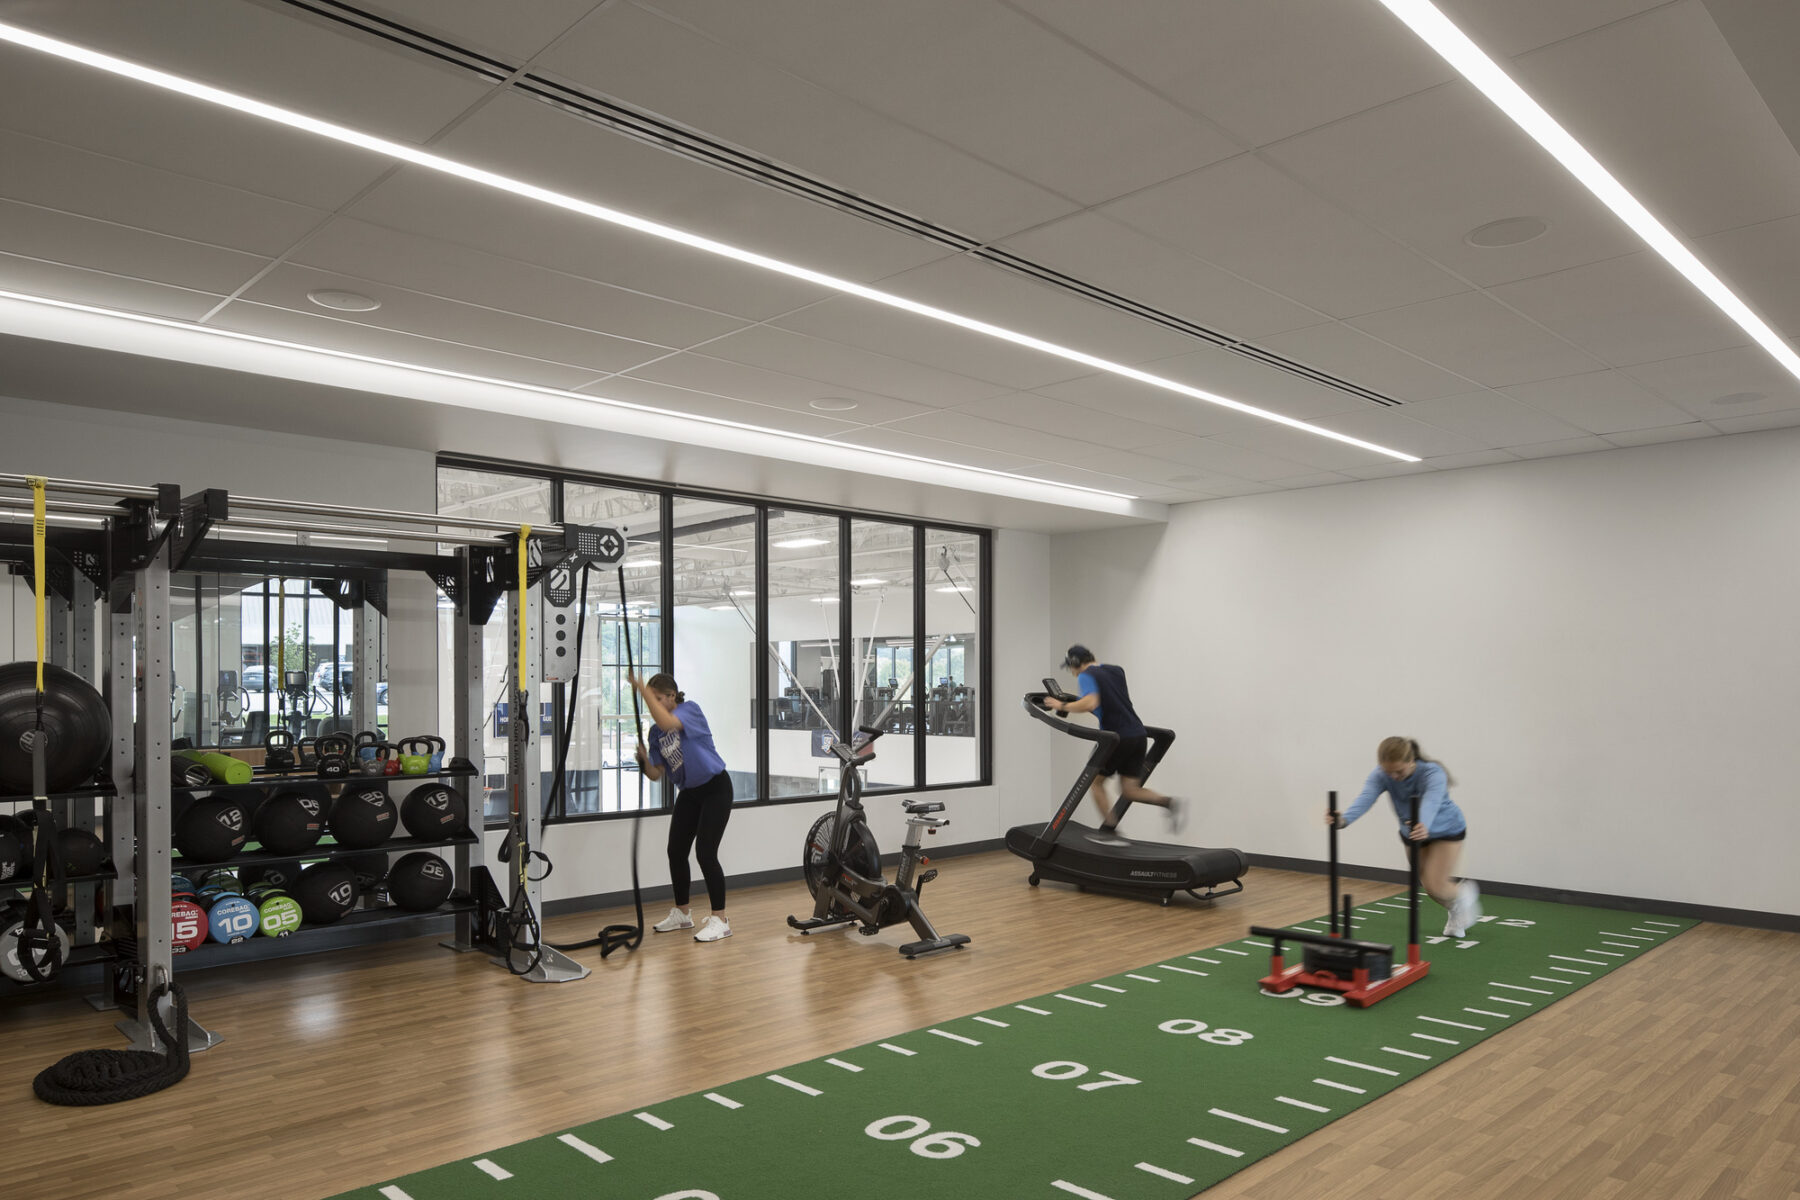 interior photograph of a multi-purpose room with sled pushing, boxing bag, spin machine, and other equipment. Window overlooking gym